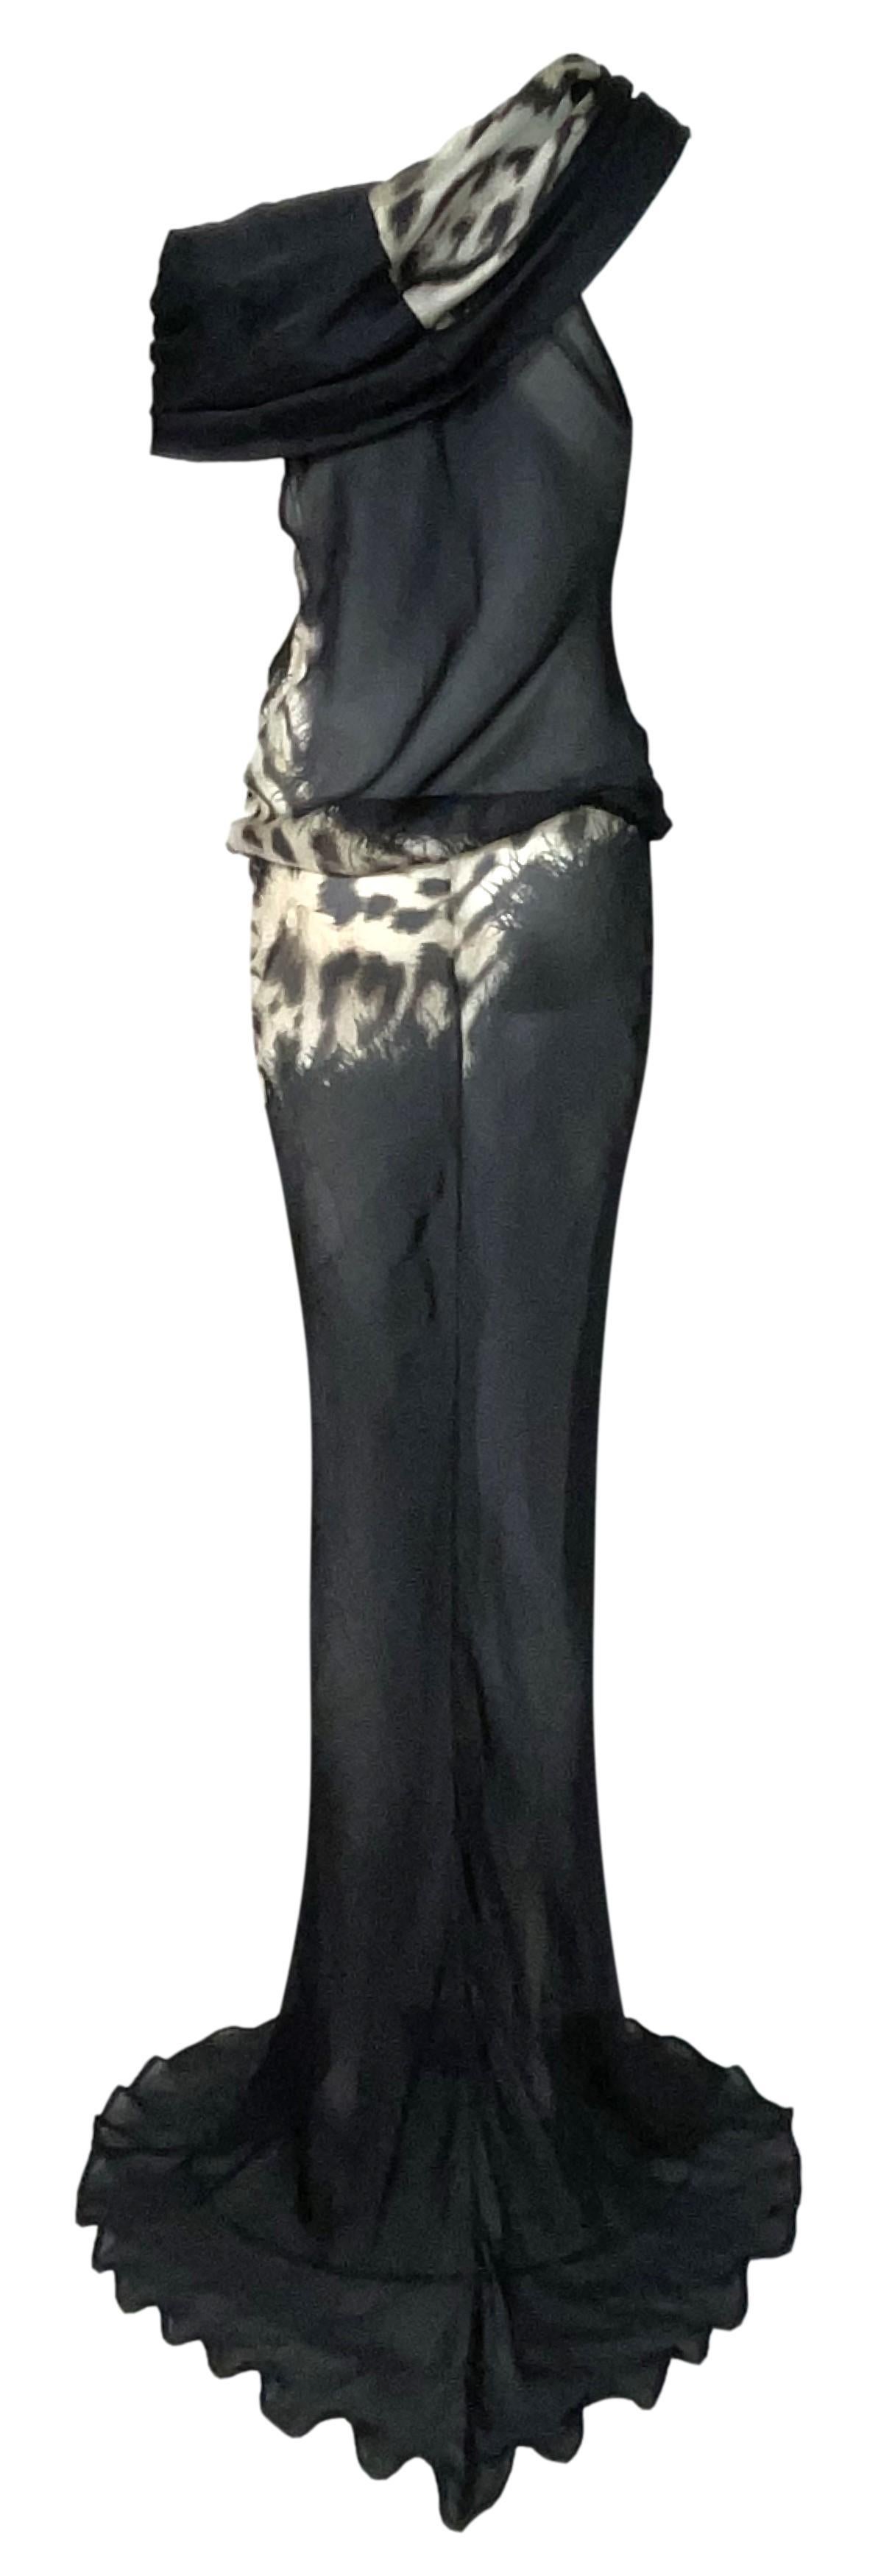 **THANK YOU FOR SHOPPING WITH MES DEUX FILLES**

DESIGNER: F/W 2001 Roberto Cavalli Runway
CONDITION: Excellent
FABRIC: Silk
COUNTRY MADE: Italy
SIZE: M
MEASUREMENTS; provided as a courtesy, not a guarantee of fit:
Chest: 30-44